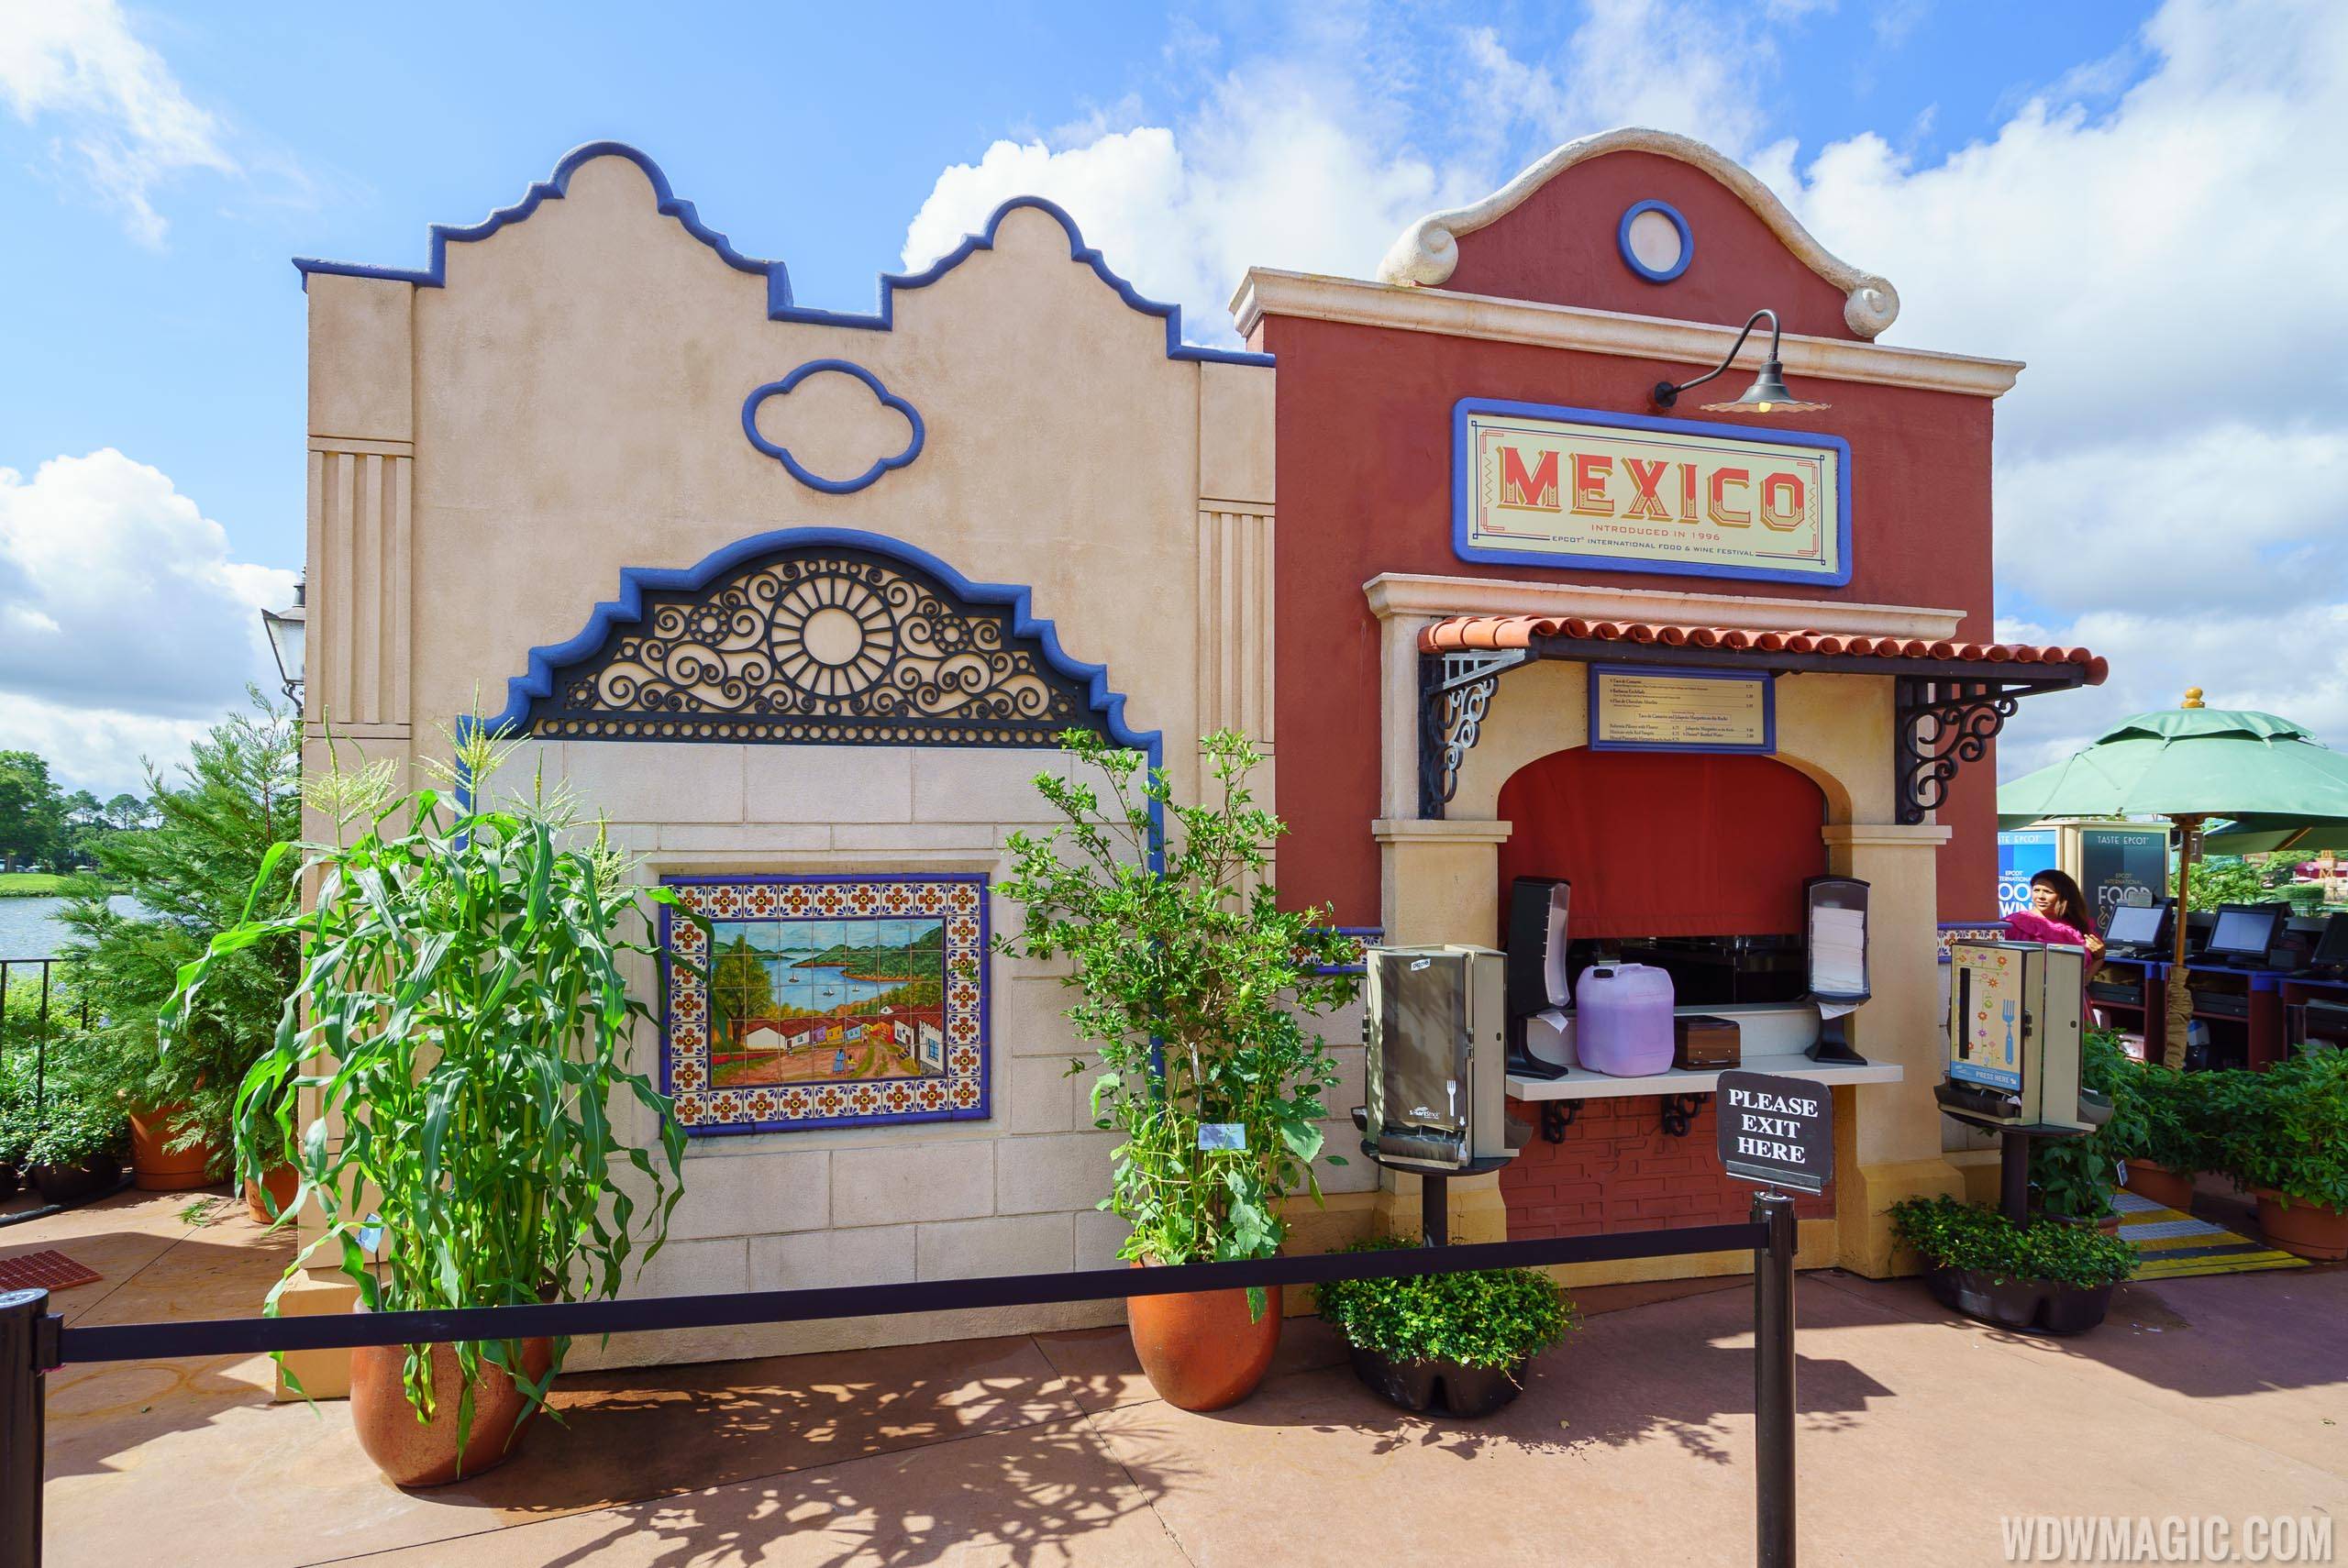 2016 Epcot Food and Wine Festival - Mexico kiosk